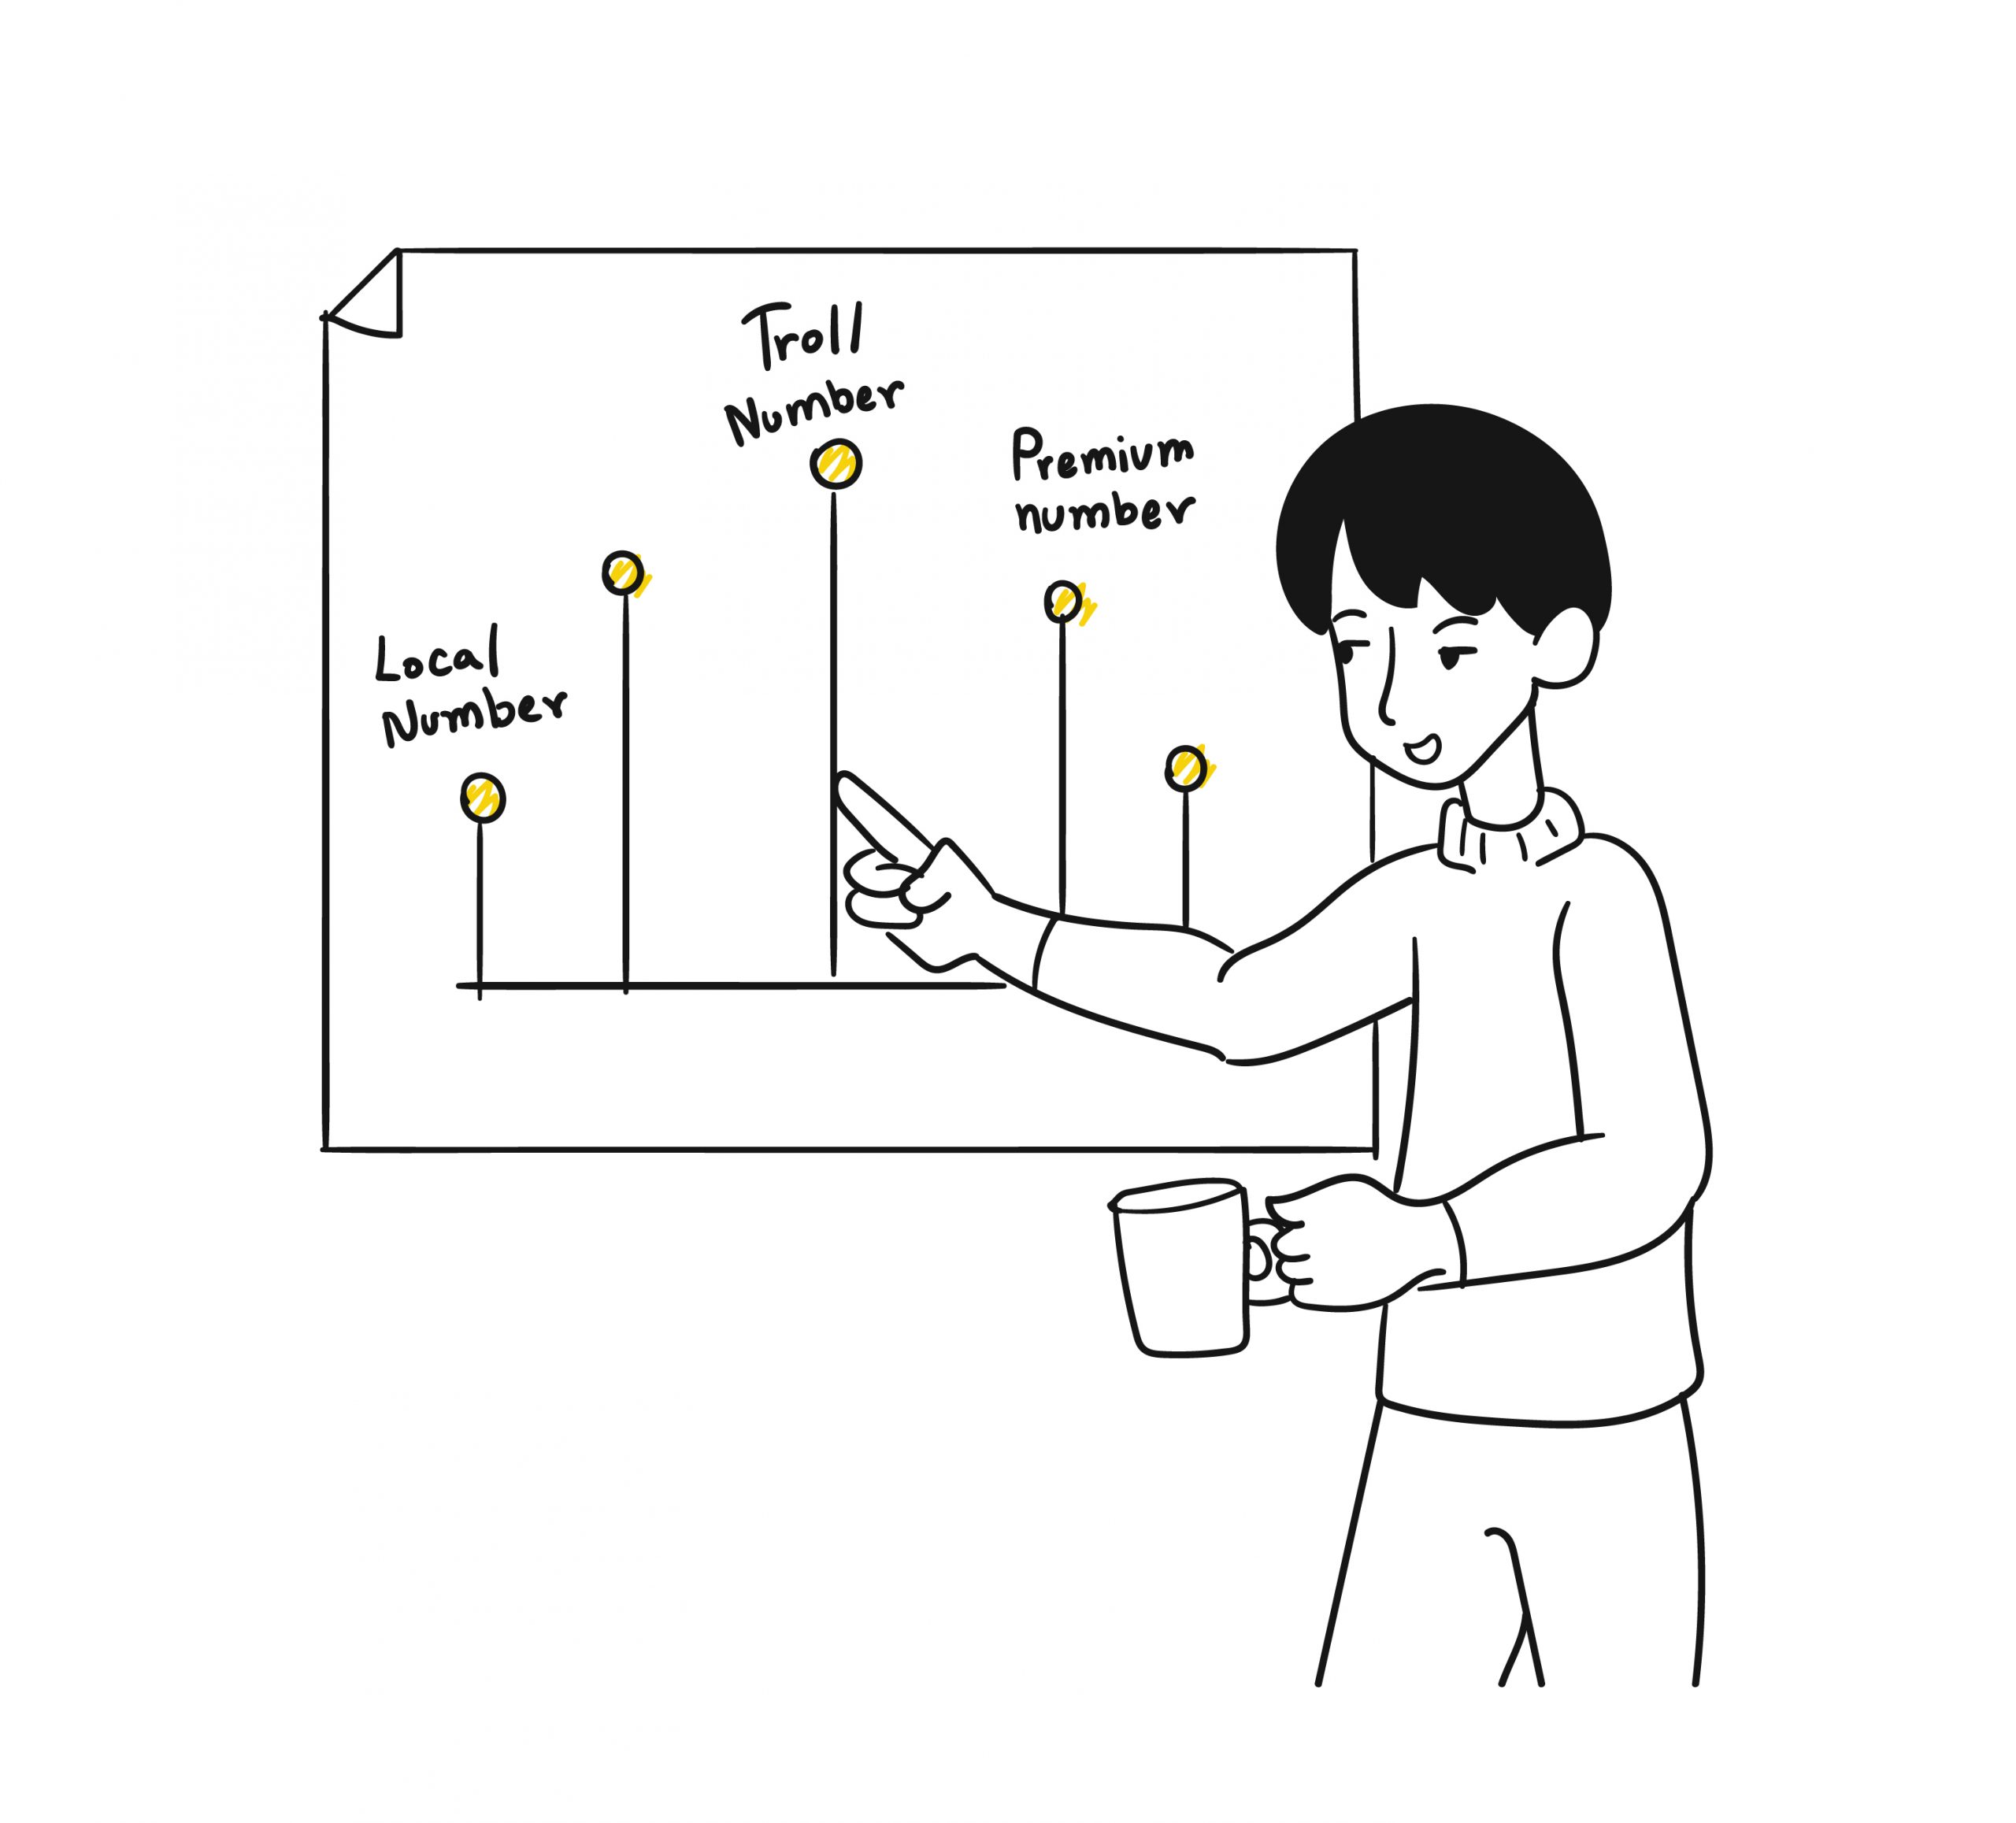 A cartoon man pointing to a number chart, indicating local, troll and premium number